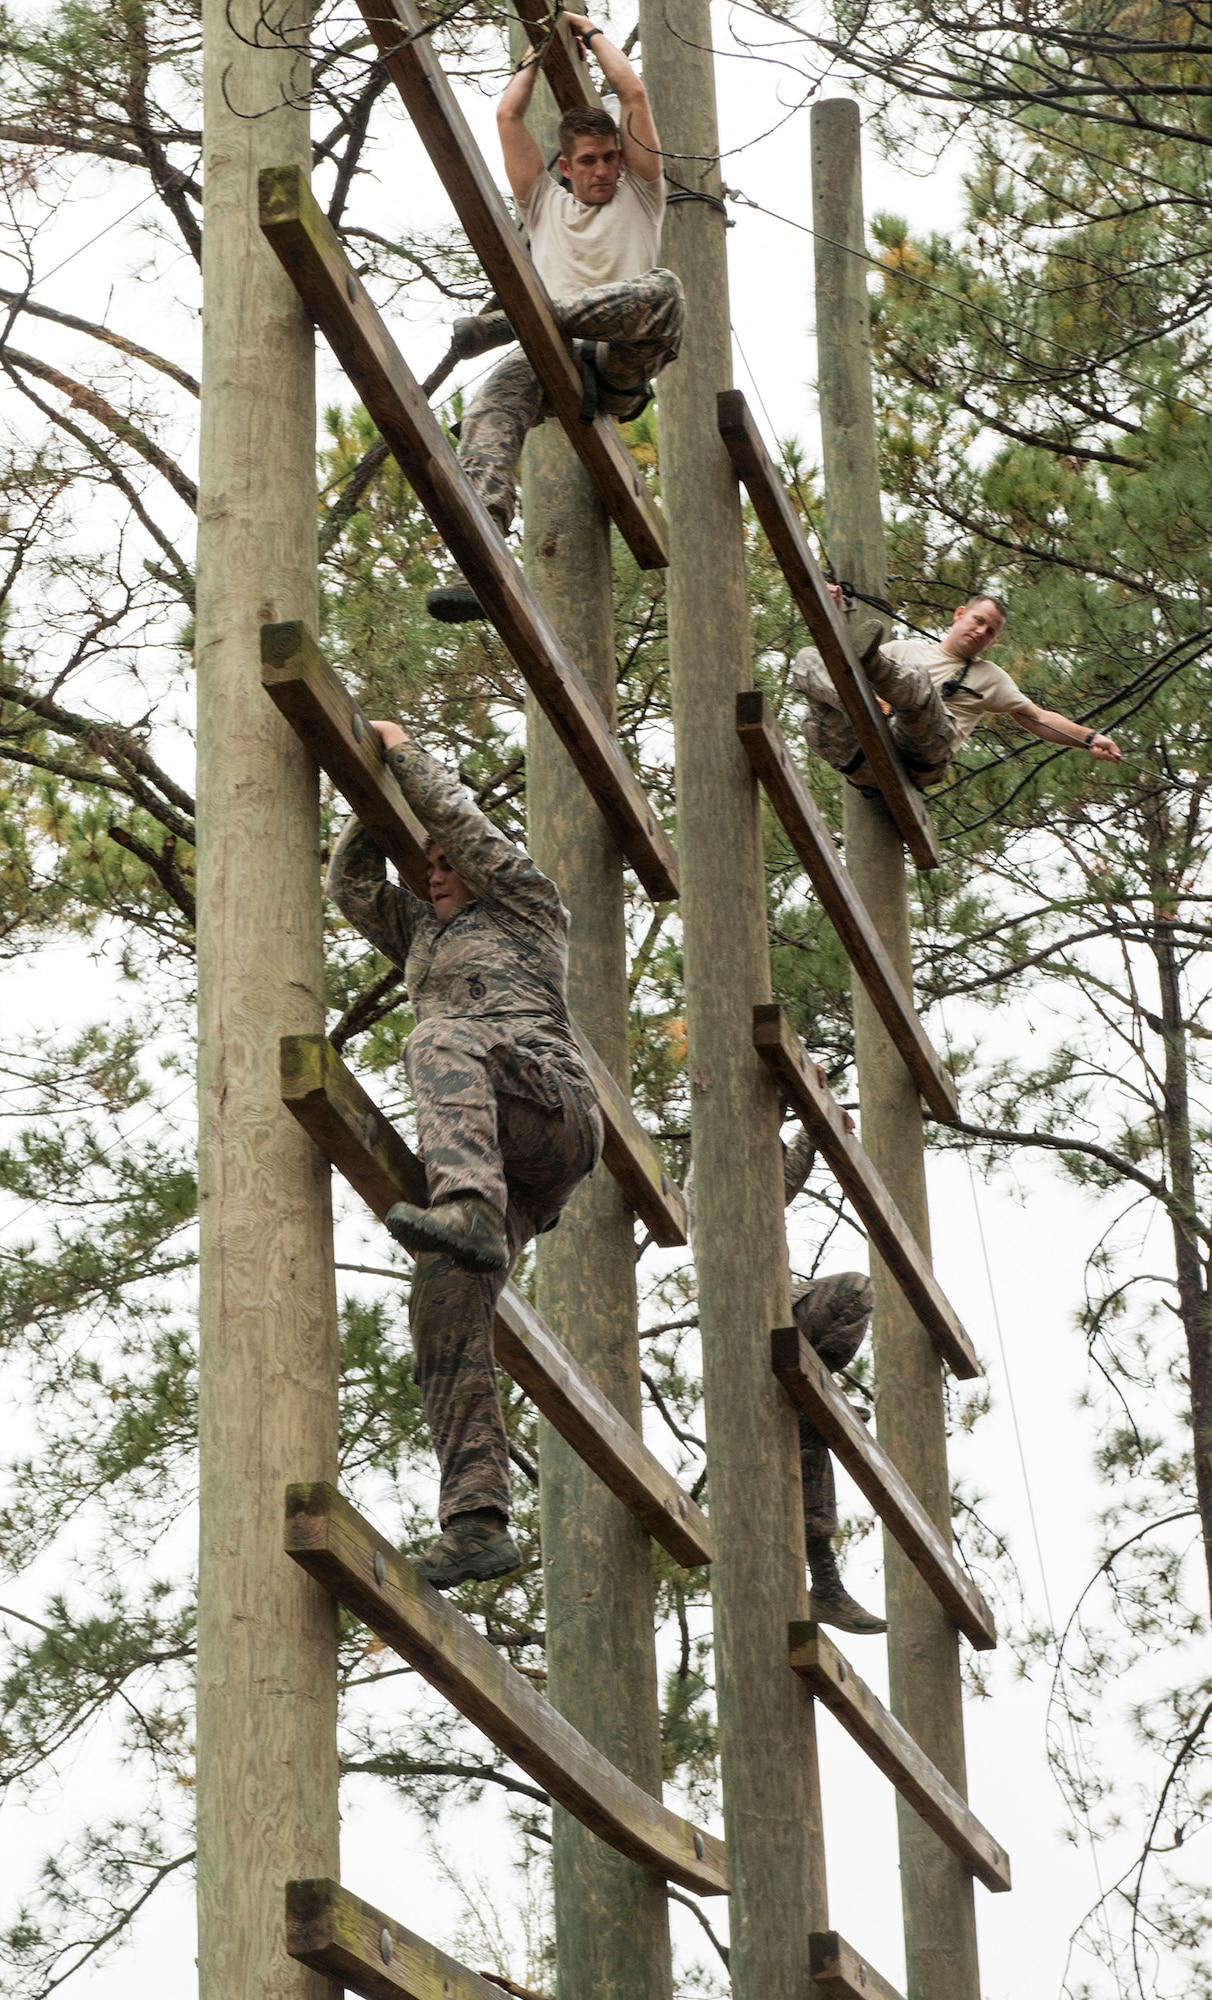 U.S. Air Force Senior Airman Max Biser, bottom left, 820th Base Defense Group fireteam member, climbs a tower as part of an obstacle course during an air assault assessment, Dec. 15, 2015, at Camp Blanding, Fla. The obstacle course was part of a voluntary, three-day assessment to qualify for Army Air Assault School attendance. (U.S. Air Force photo by Airman 1st Class Lauren M. Johnson/Released)


